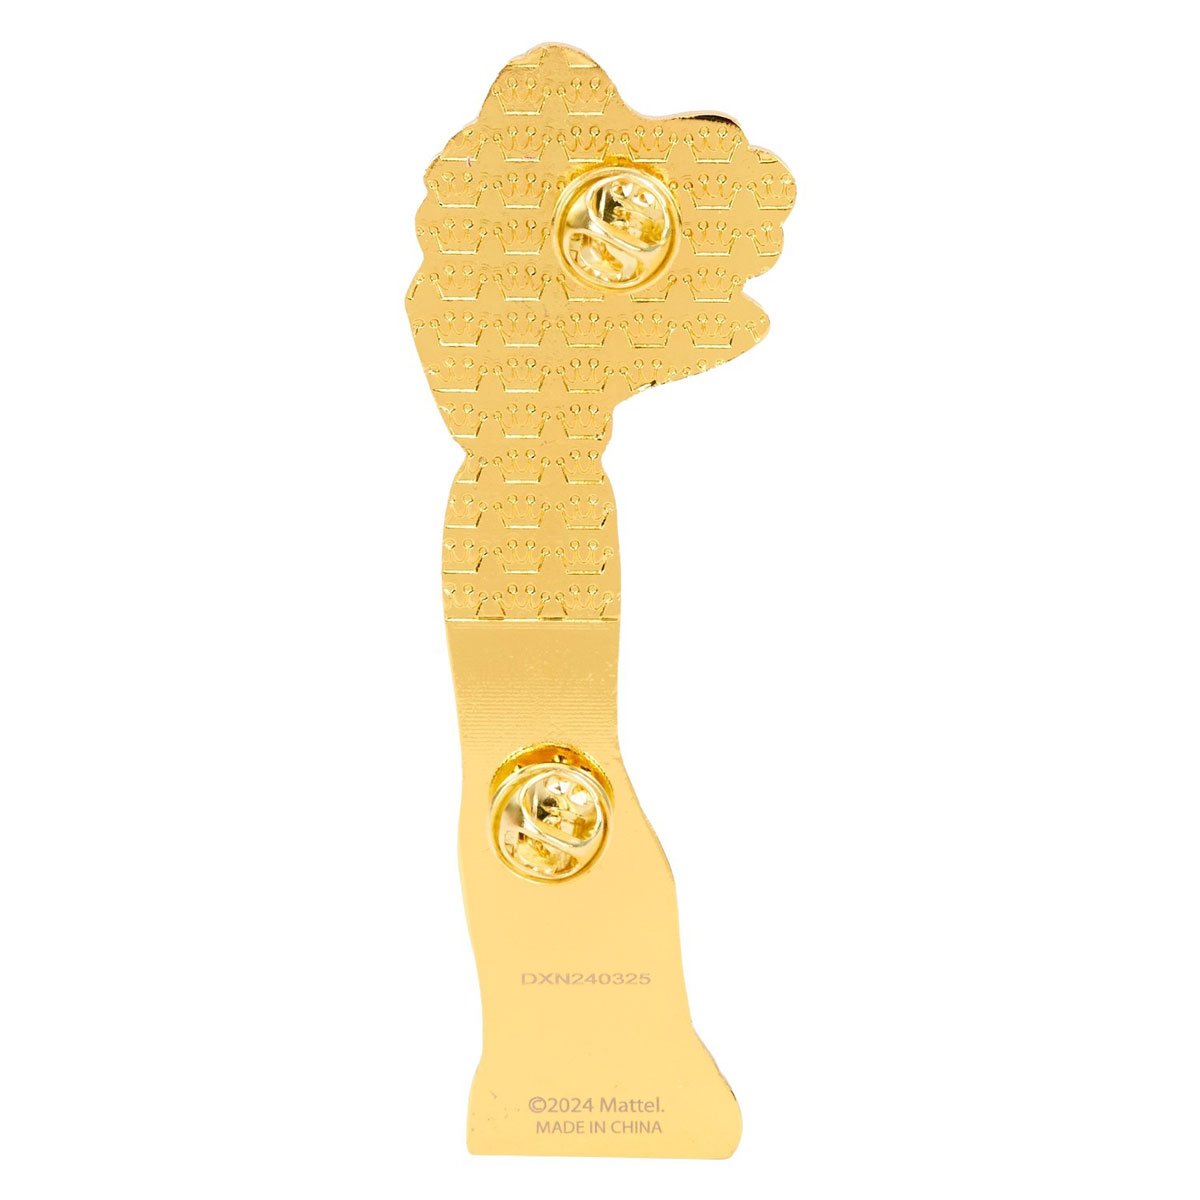 Back view of one of the magnetic pins from the Loungefly Mattel Barbie 65th Anniversary Paper Doll Magnetic Pin Set, showing the gold-tone finish and pin clasps.